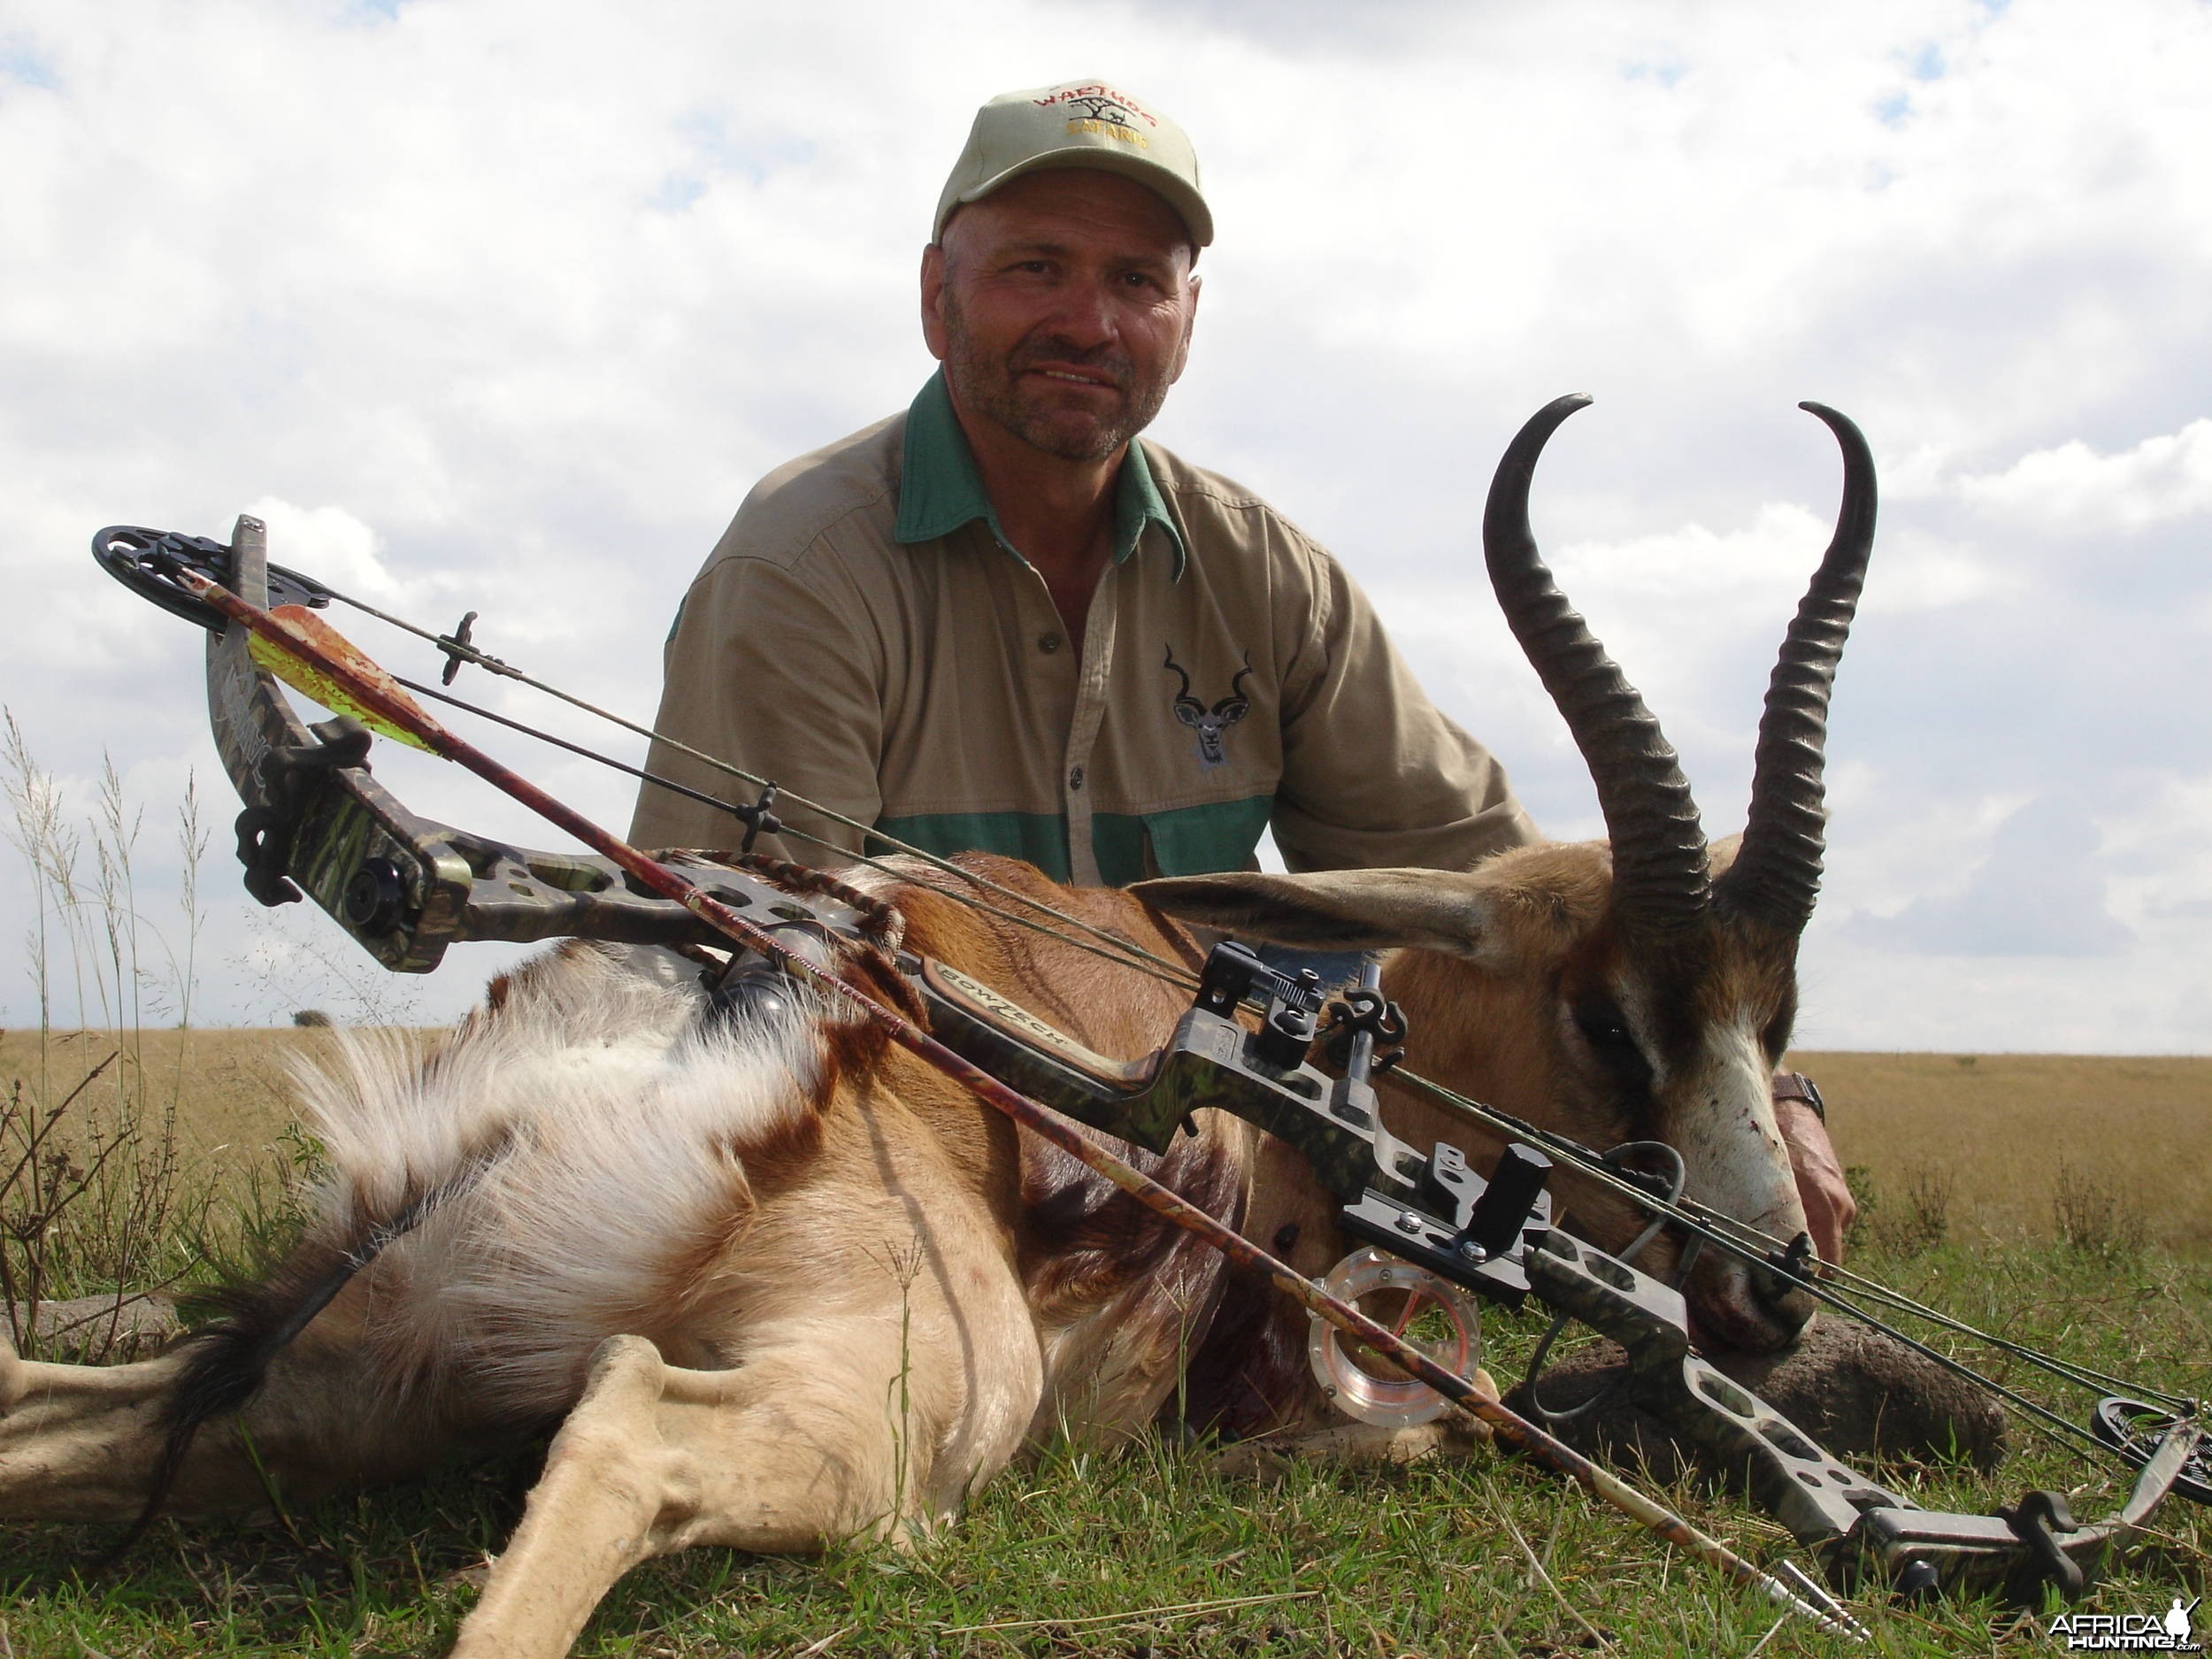 Copper Springbok with bow, took with Warthog Safaris